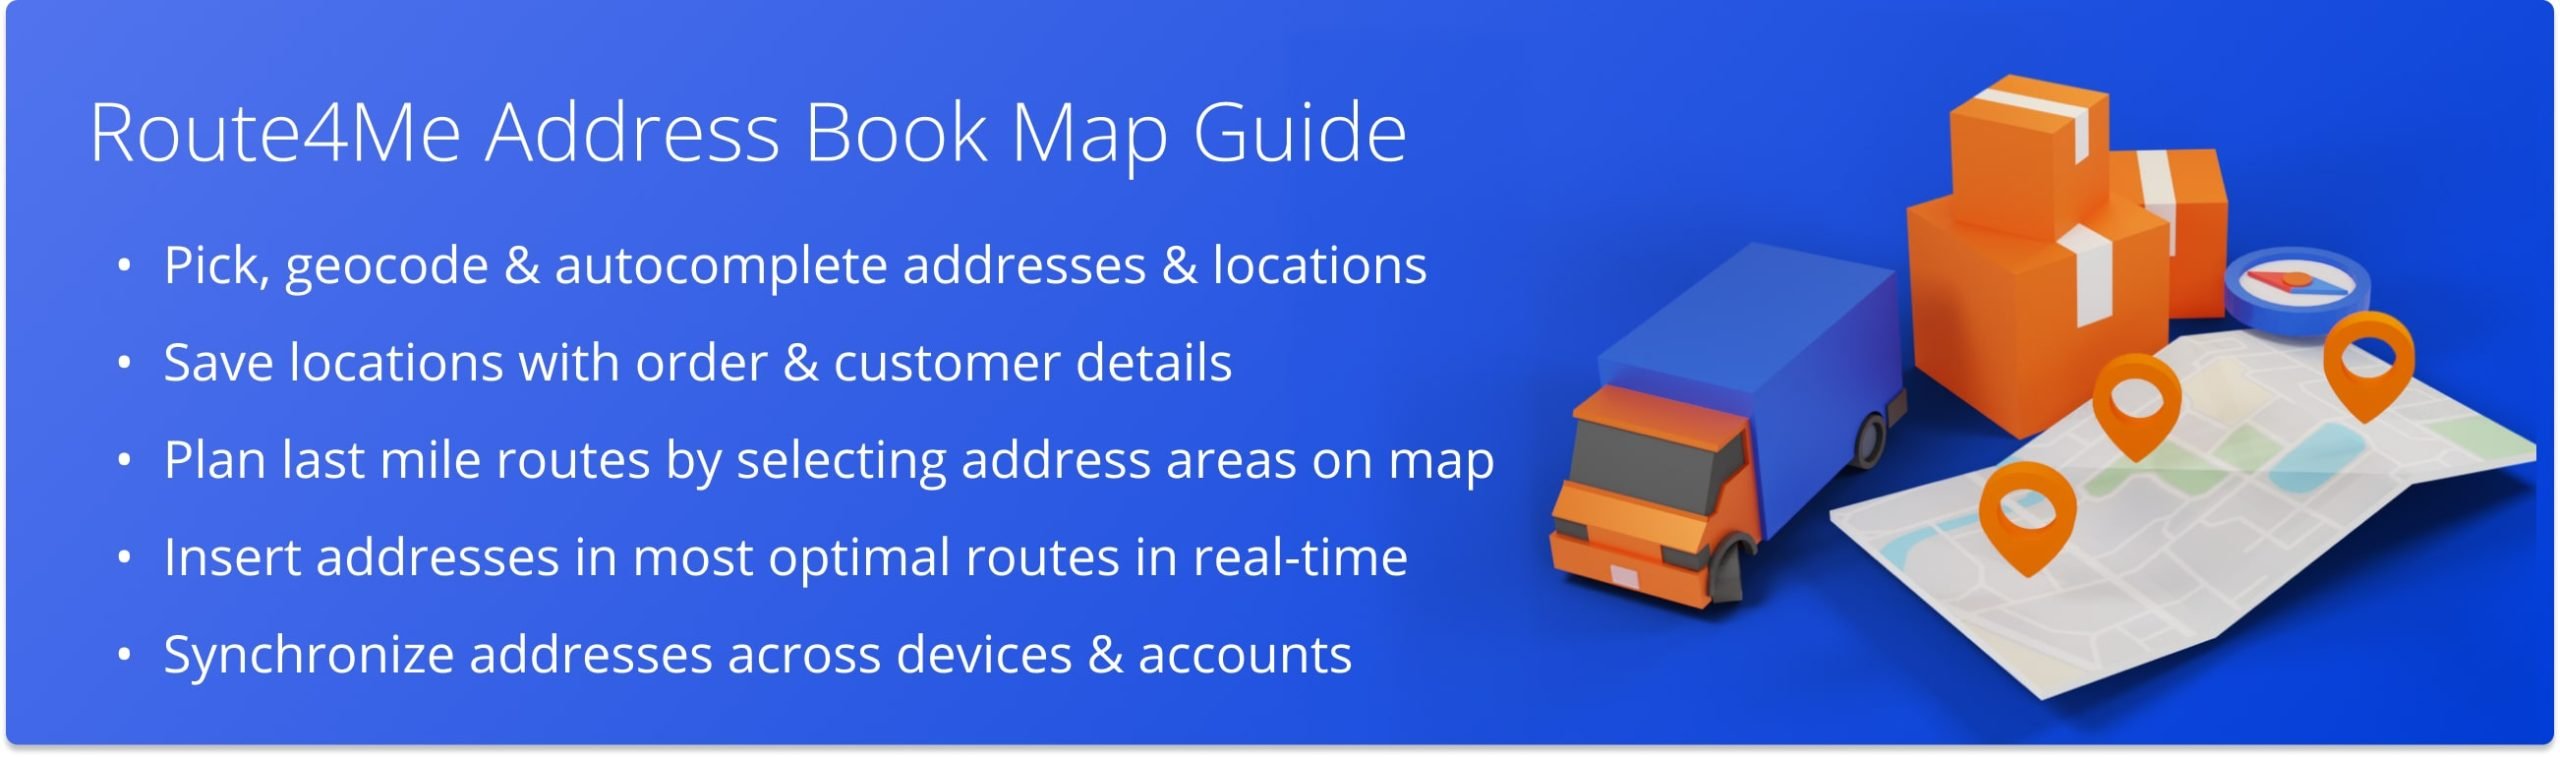 Route4Me Address Book Map Guide: Add addresses, assign addresses to team, plan last mile routes with addresses, download addresses, and more.